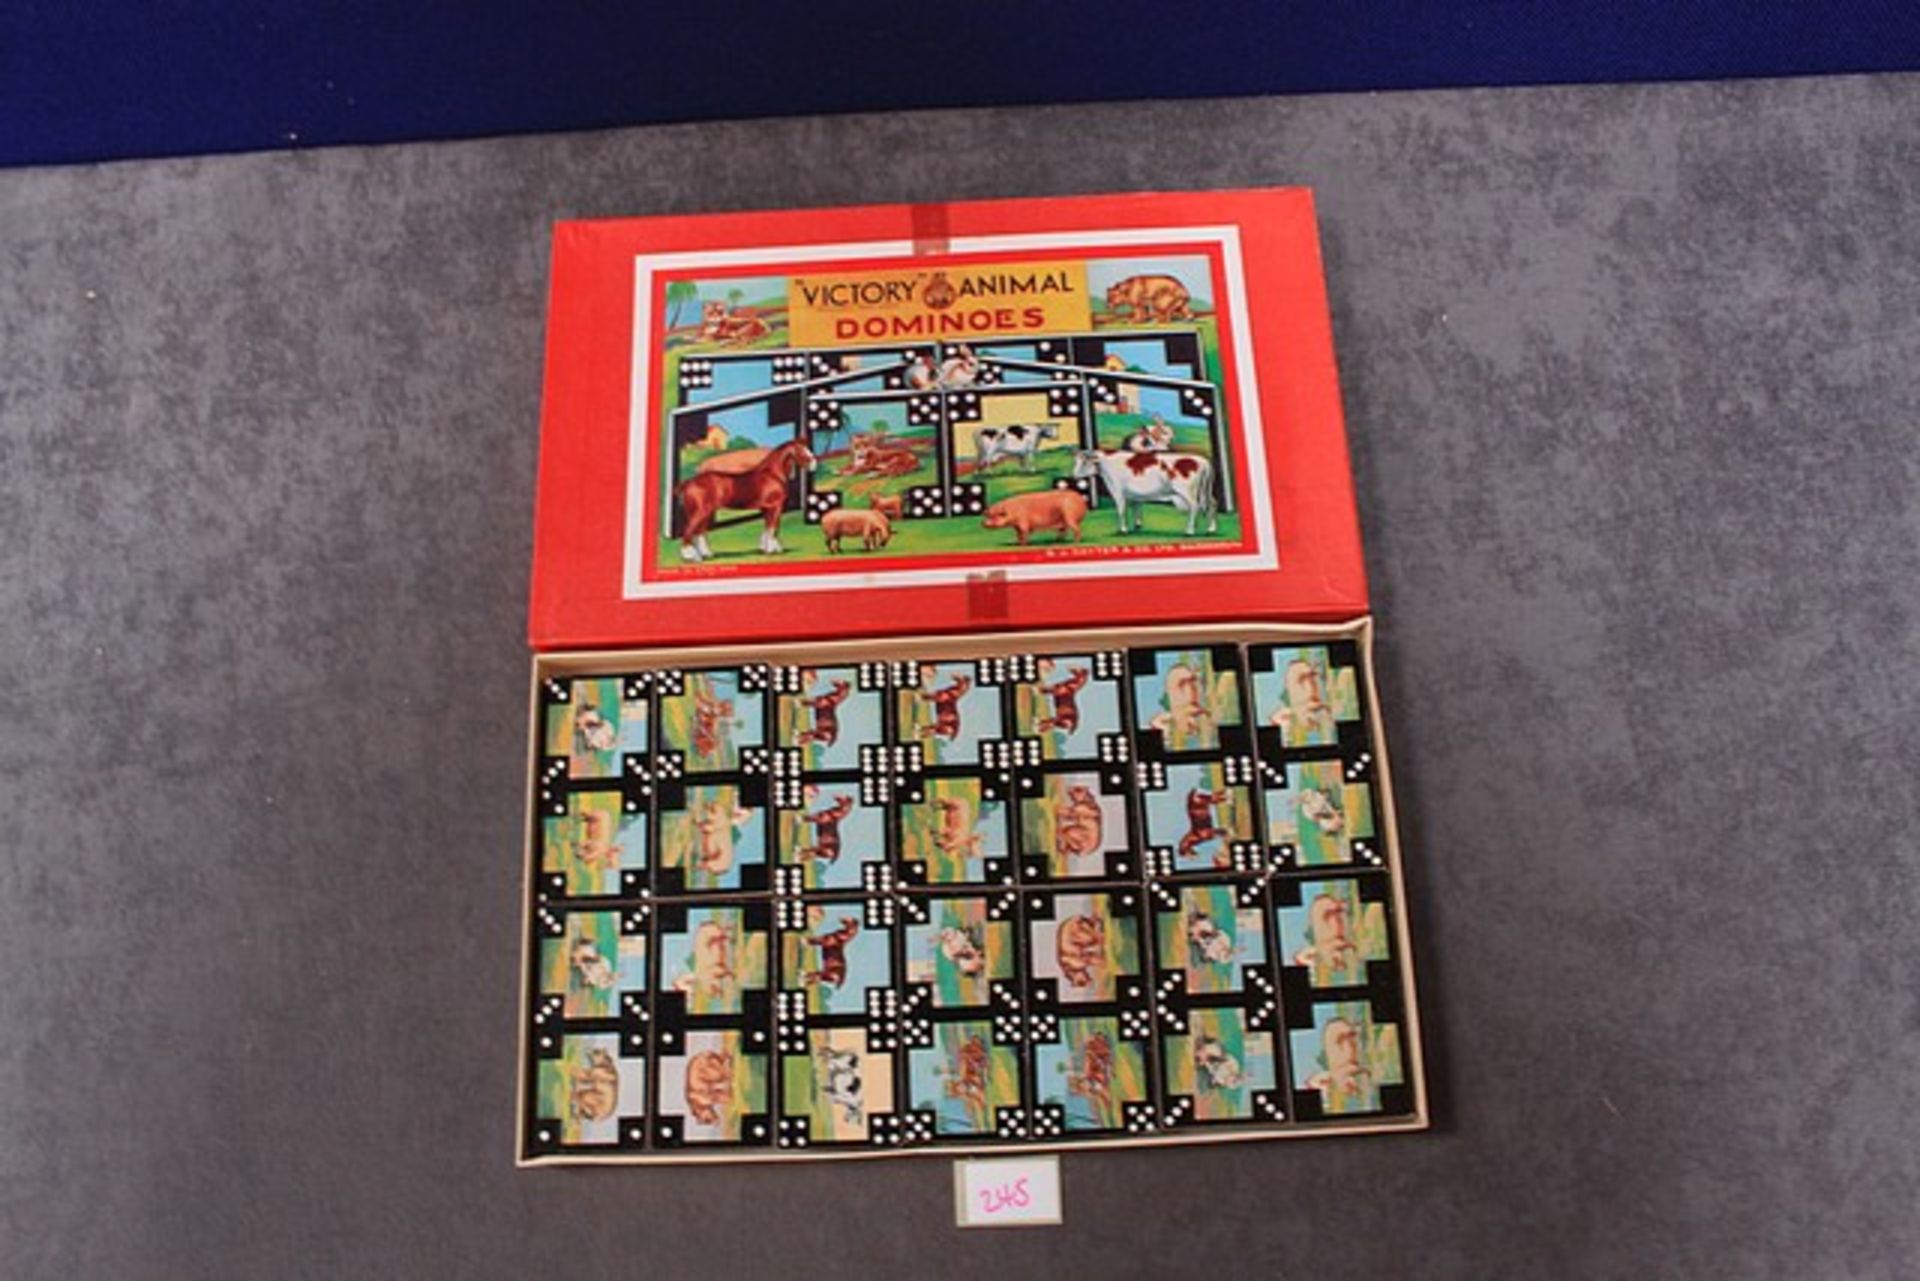 Victory Wooden Animal Dominoes in superb condition with a great box - Image 2 of 2